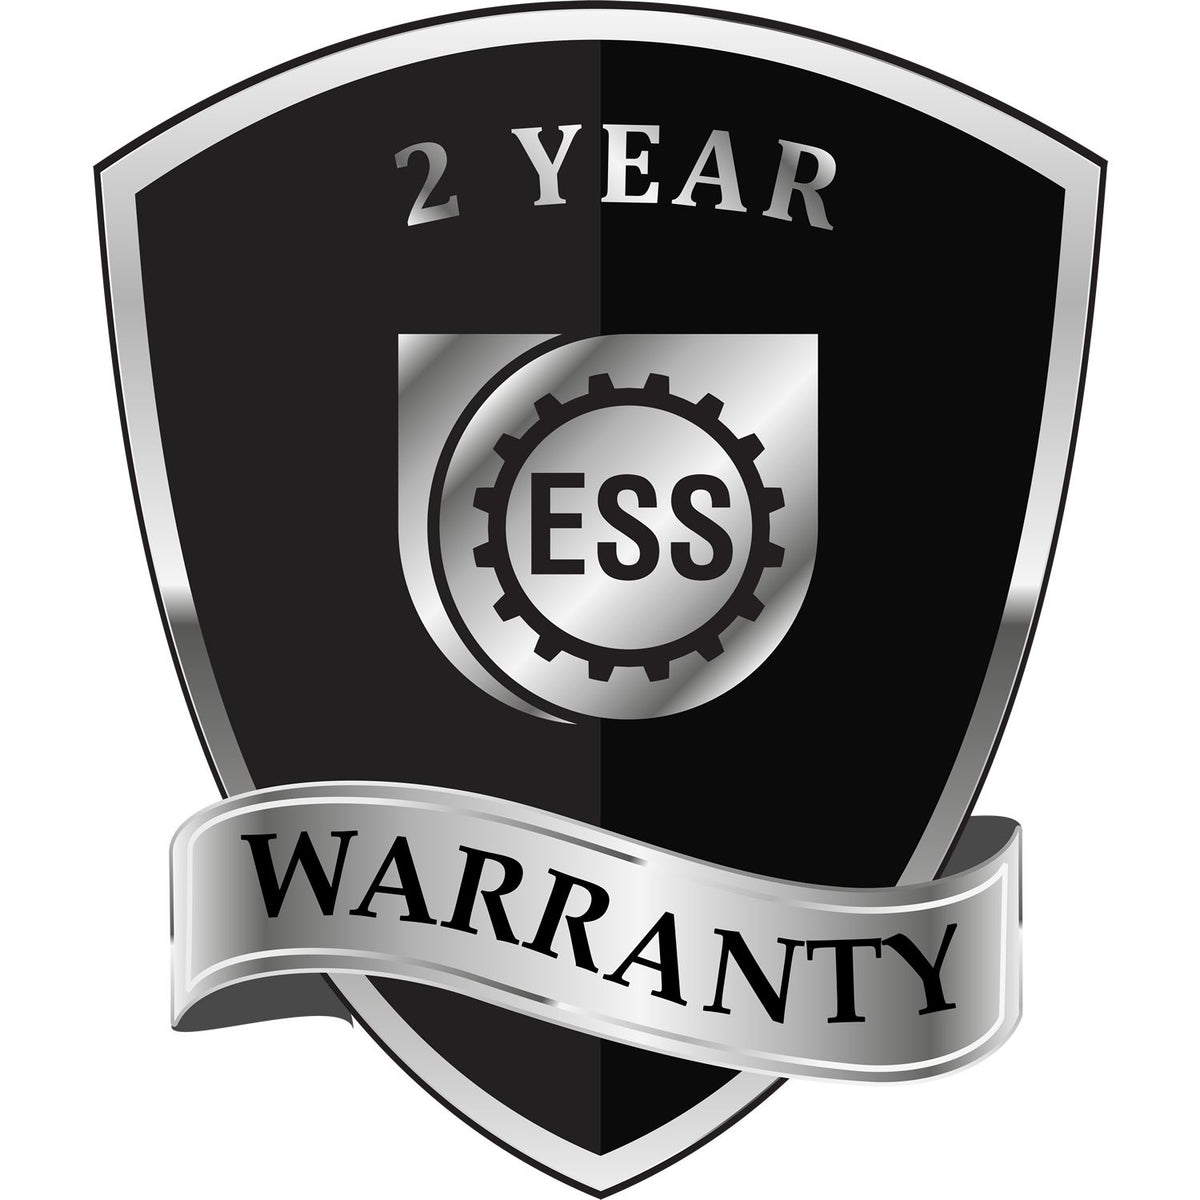 A badge or emblem showing a warranty icon for the State of Virginia Extended Long Reach Engineer Seal